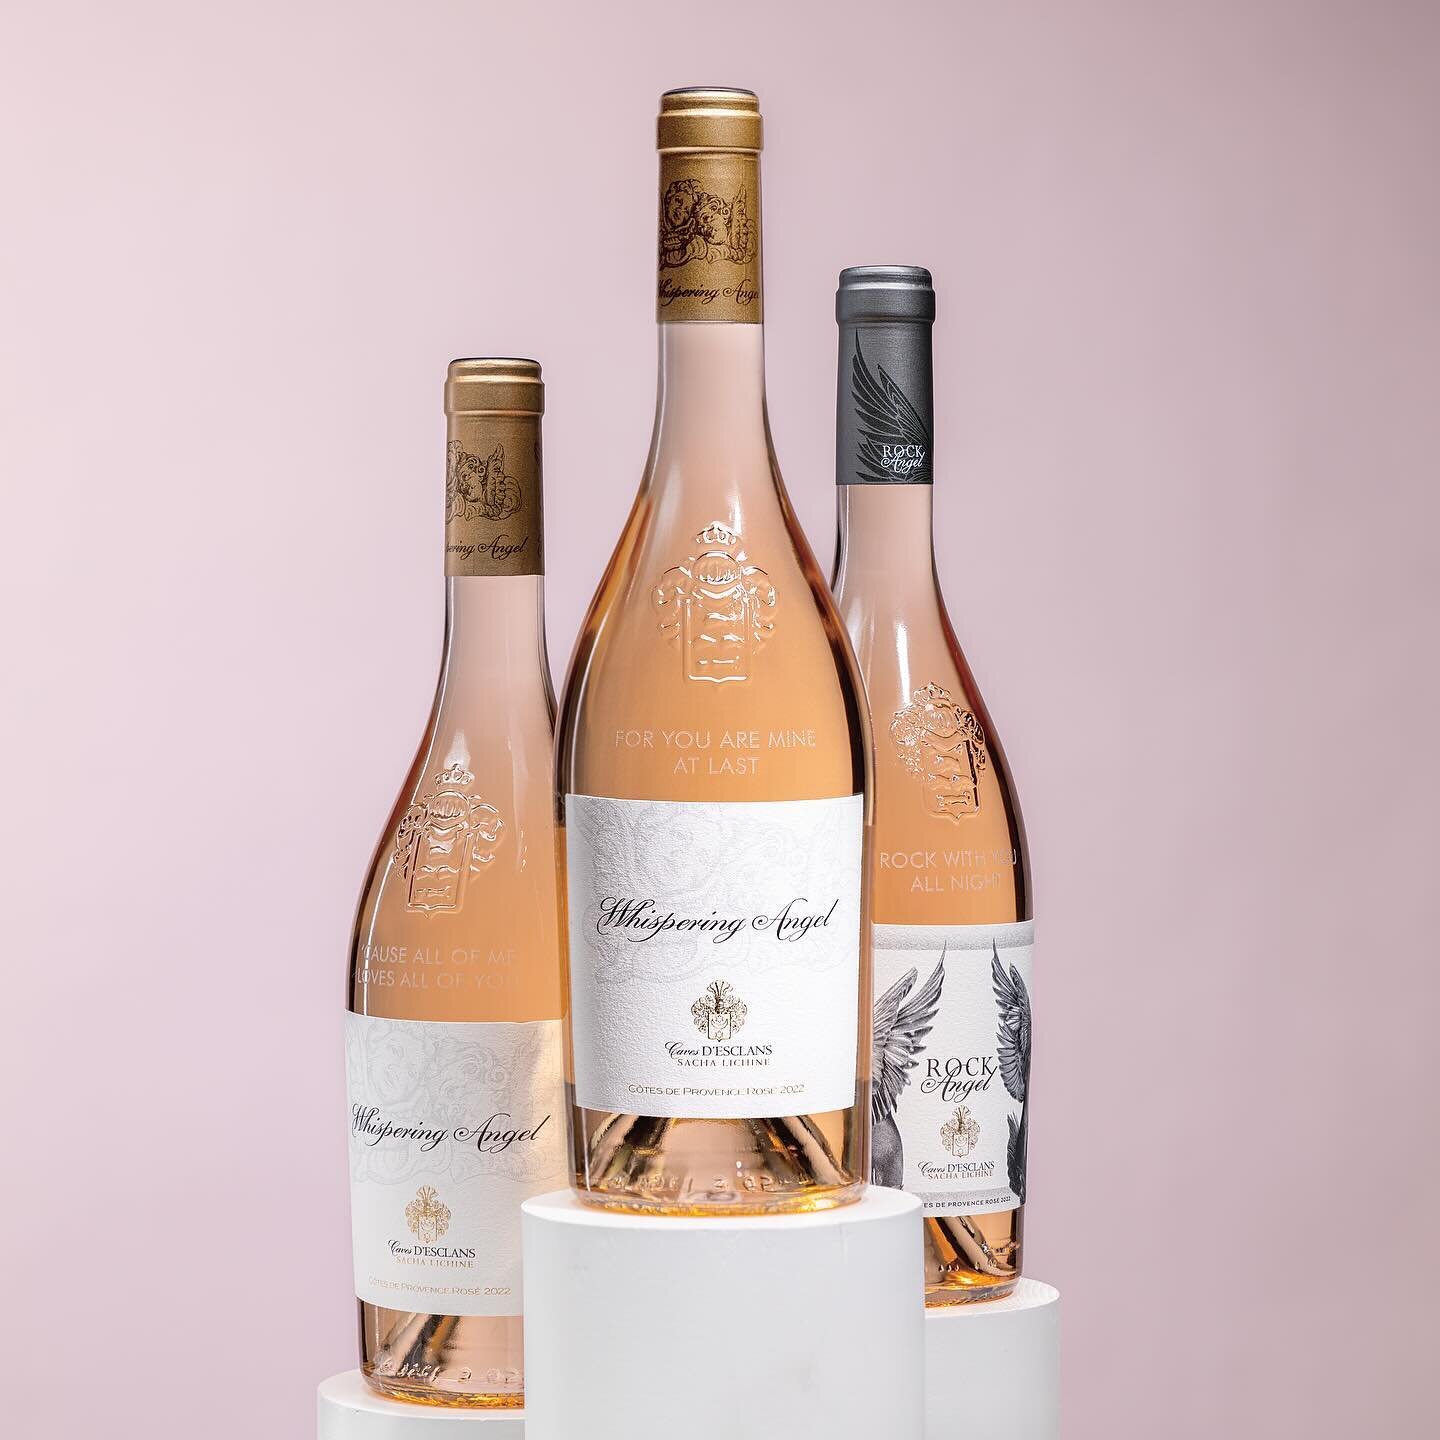 Say it with @thewhisperingangel ros&eacute; this #ValentinesDay. Personalize a bottle for the one you adore on esclans.com. Shop now for the perfect gift. 

Please enjoy responsibly. 
#WhisperingAngel #ChateaudEsclans #AuraGroupe